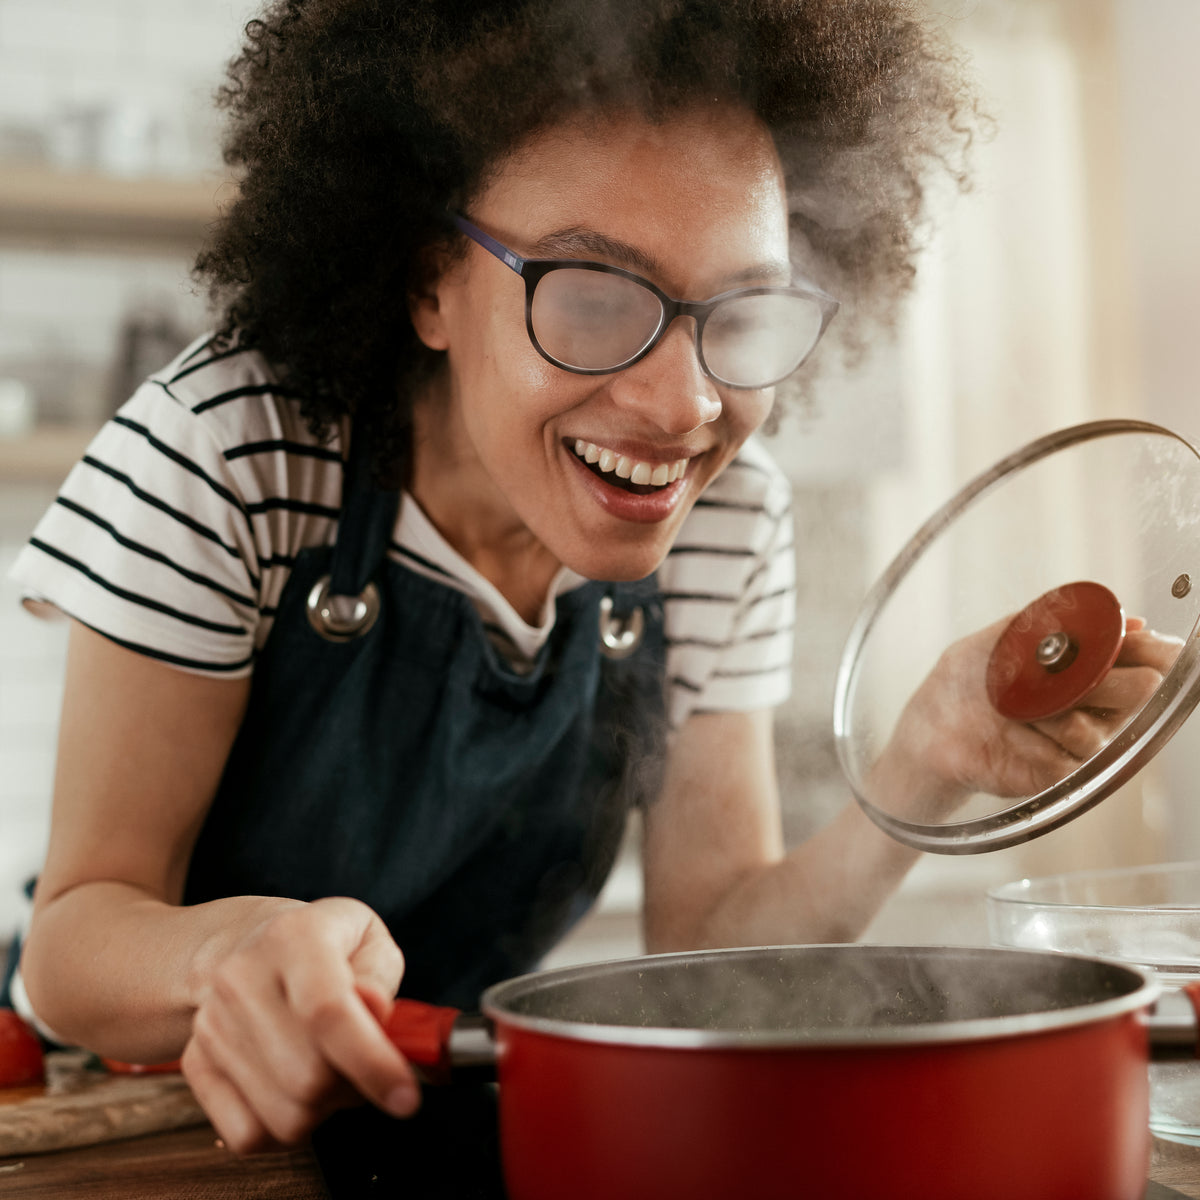 Lady who is smiling with steamed glasses as she looks into a pot on a stove.